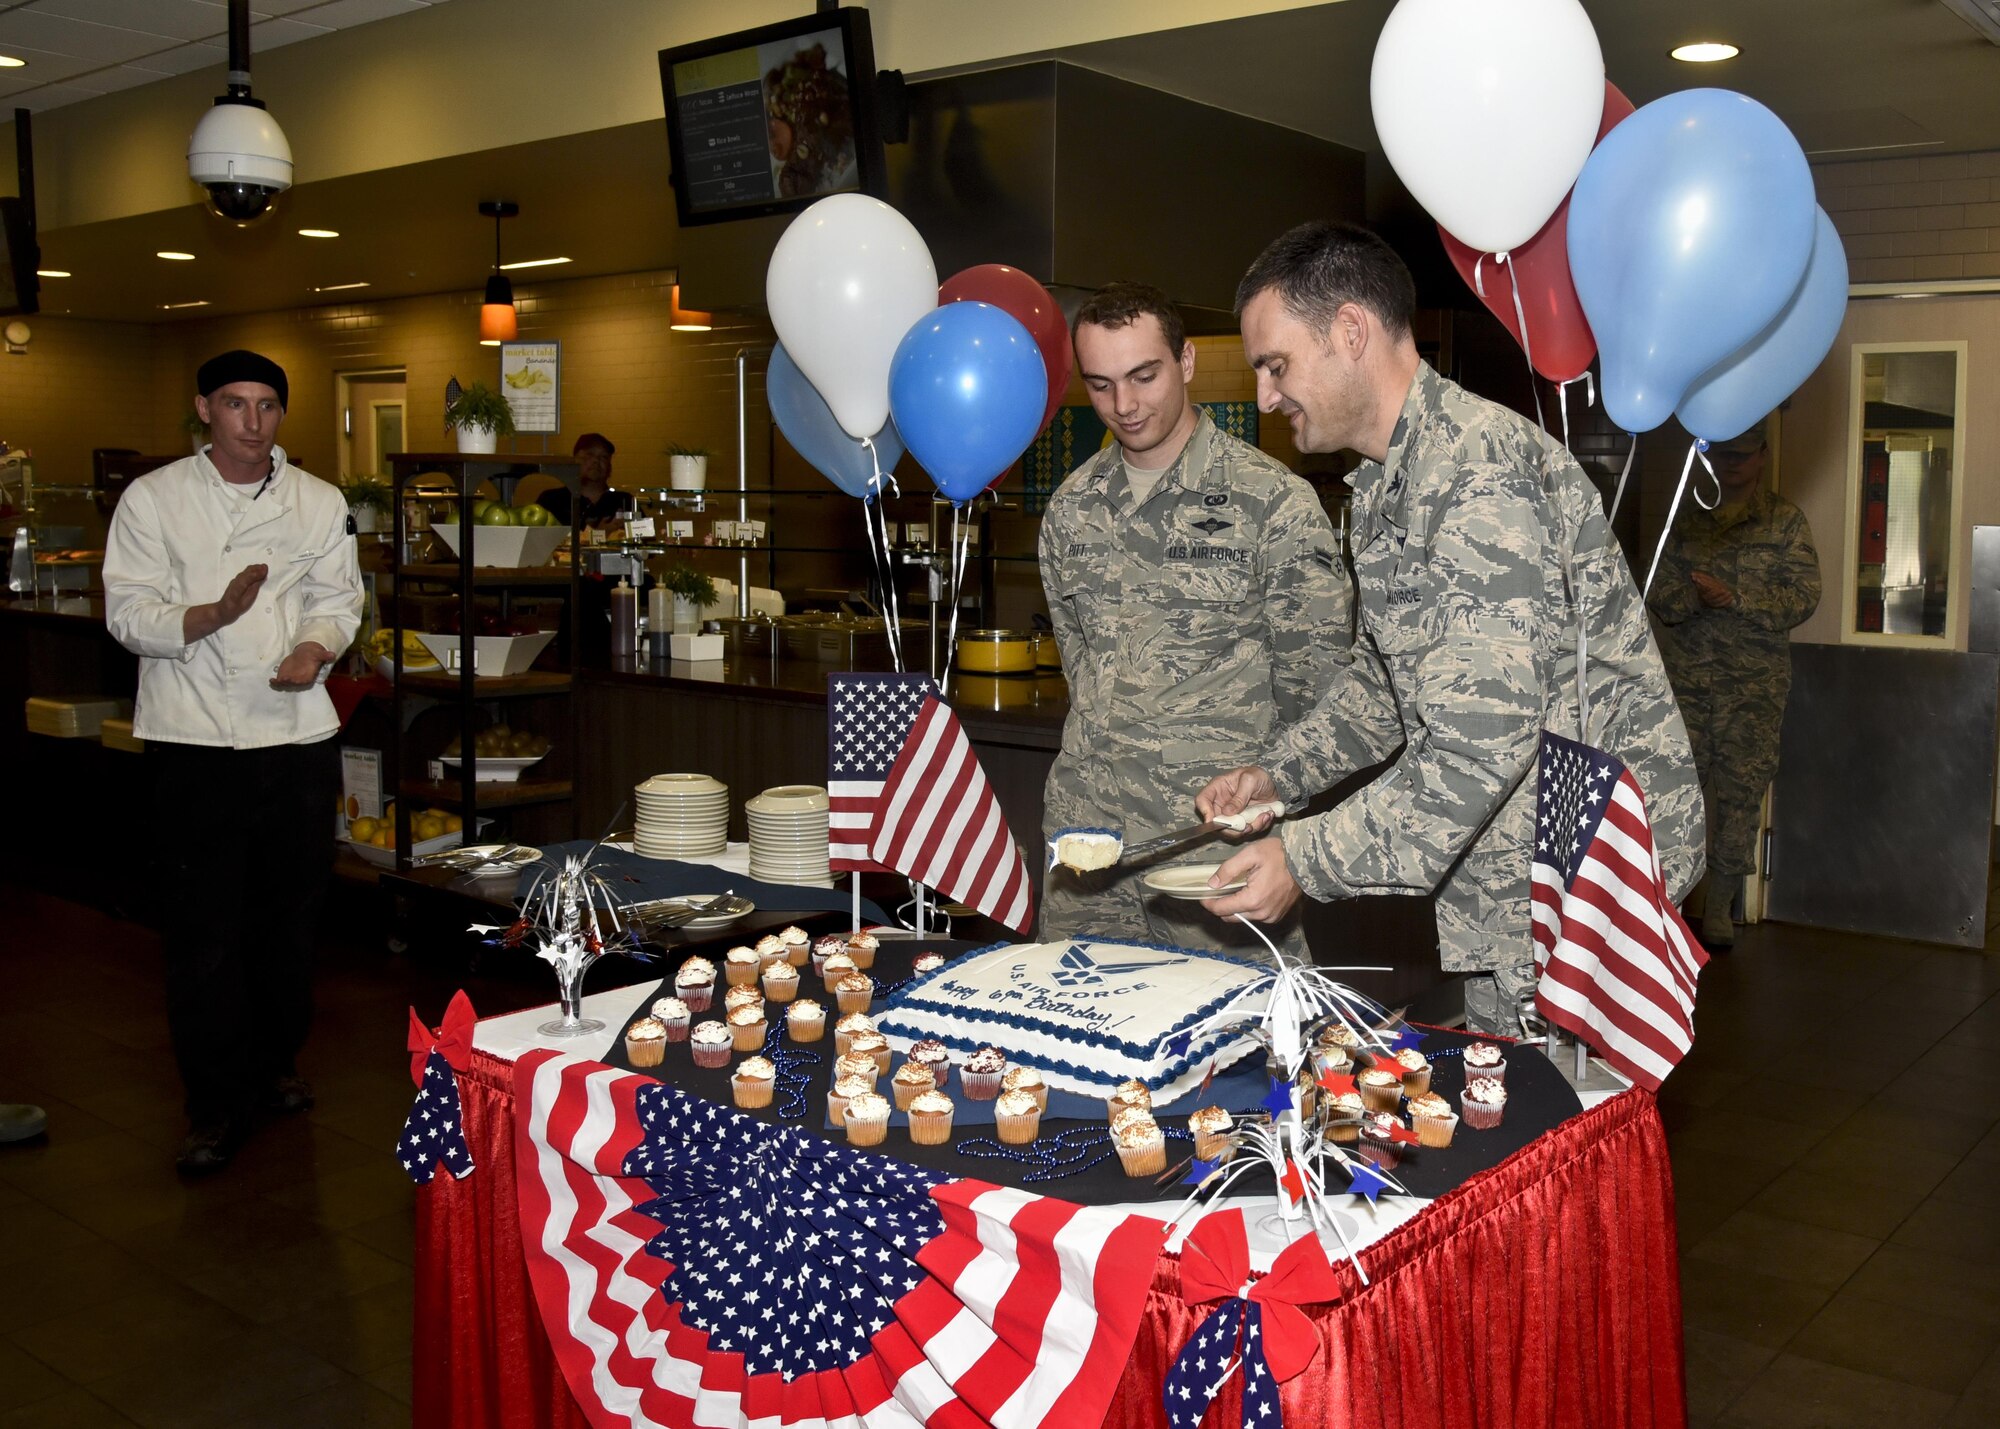 Col. John Groves, 336th Training Group commander, serves a piece of cake to Airman 1st Class Logan Pitt, 336th Training Support Squadron aircrew flight equipment apprentice, during a cake cutting ceremony Sept. 15, 2016, at Fairchild Air Force Base, Wash. The ceremony was to celebrate the 69th birthday of the Air Force. 